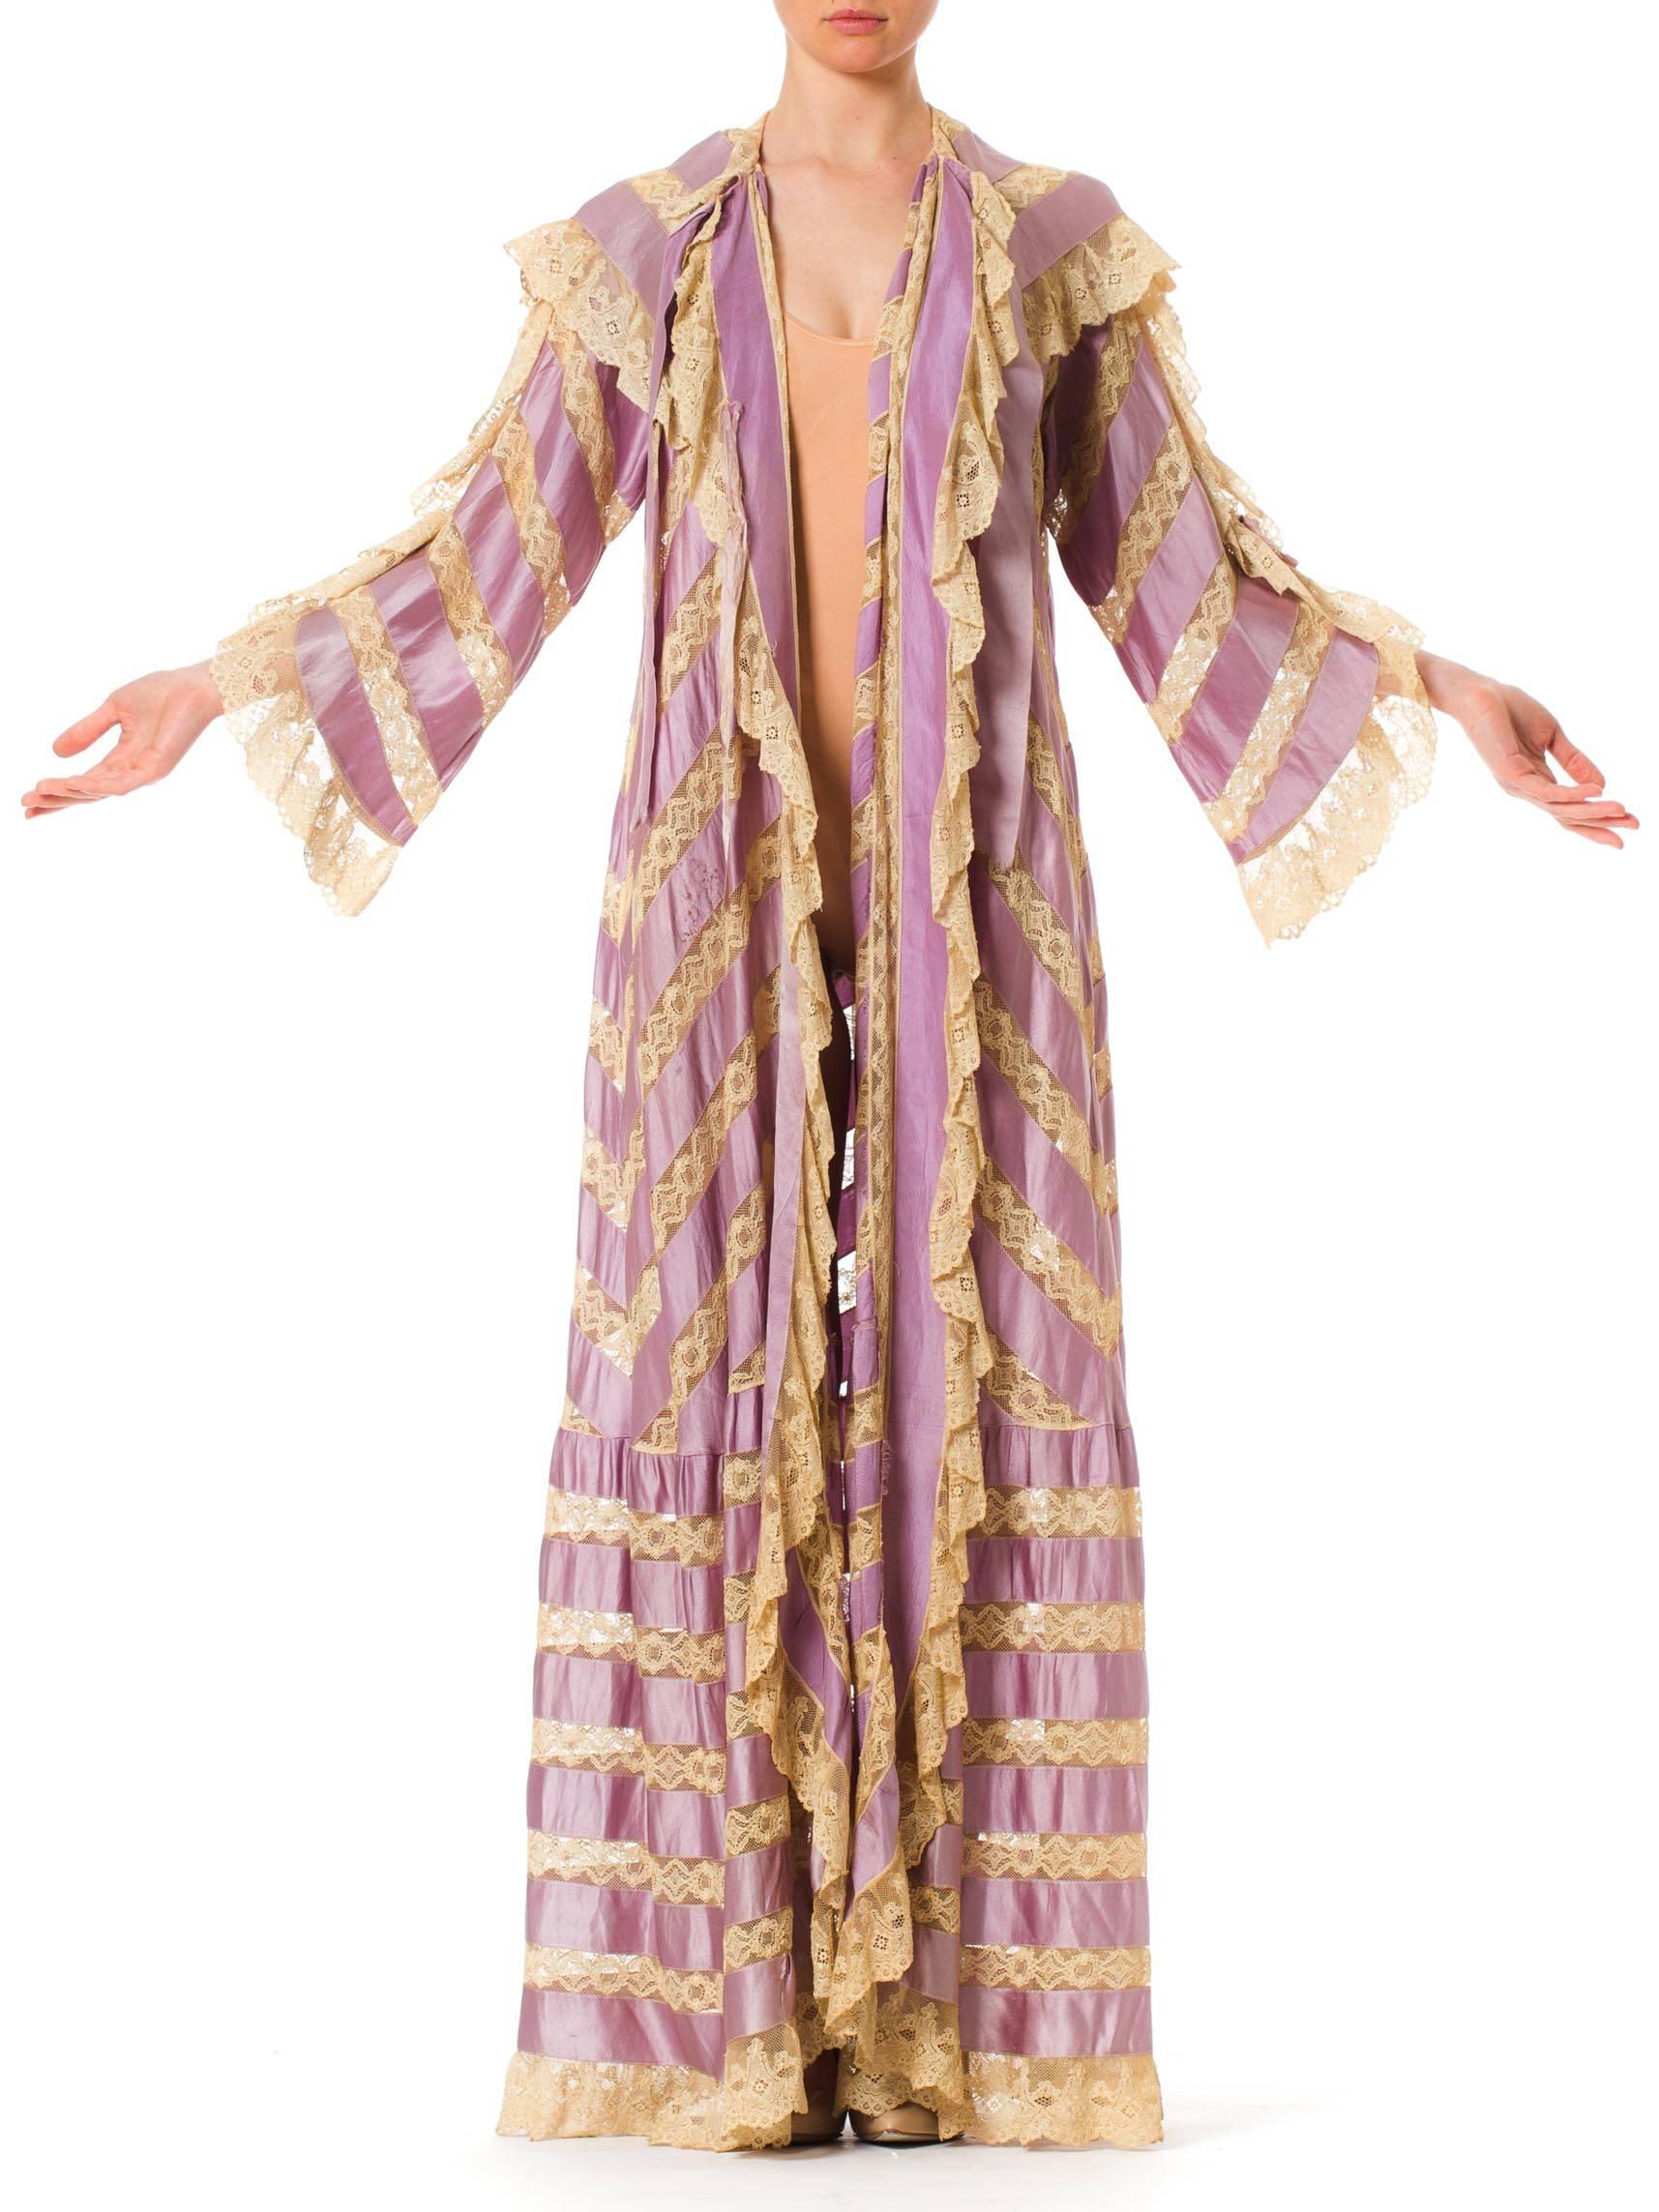 This is an incredibly beautiful peignoir from the turn of the 20th century, dating to c. 1900-1905. Made entirely of stripes and chevrons of lilac silk satin ribbon, the garment is held together by insets of delicate cream lace. The ties which hold